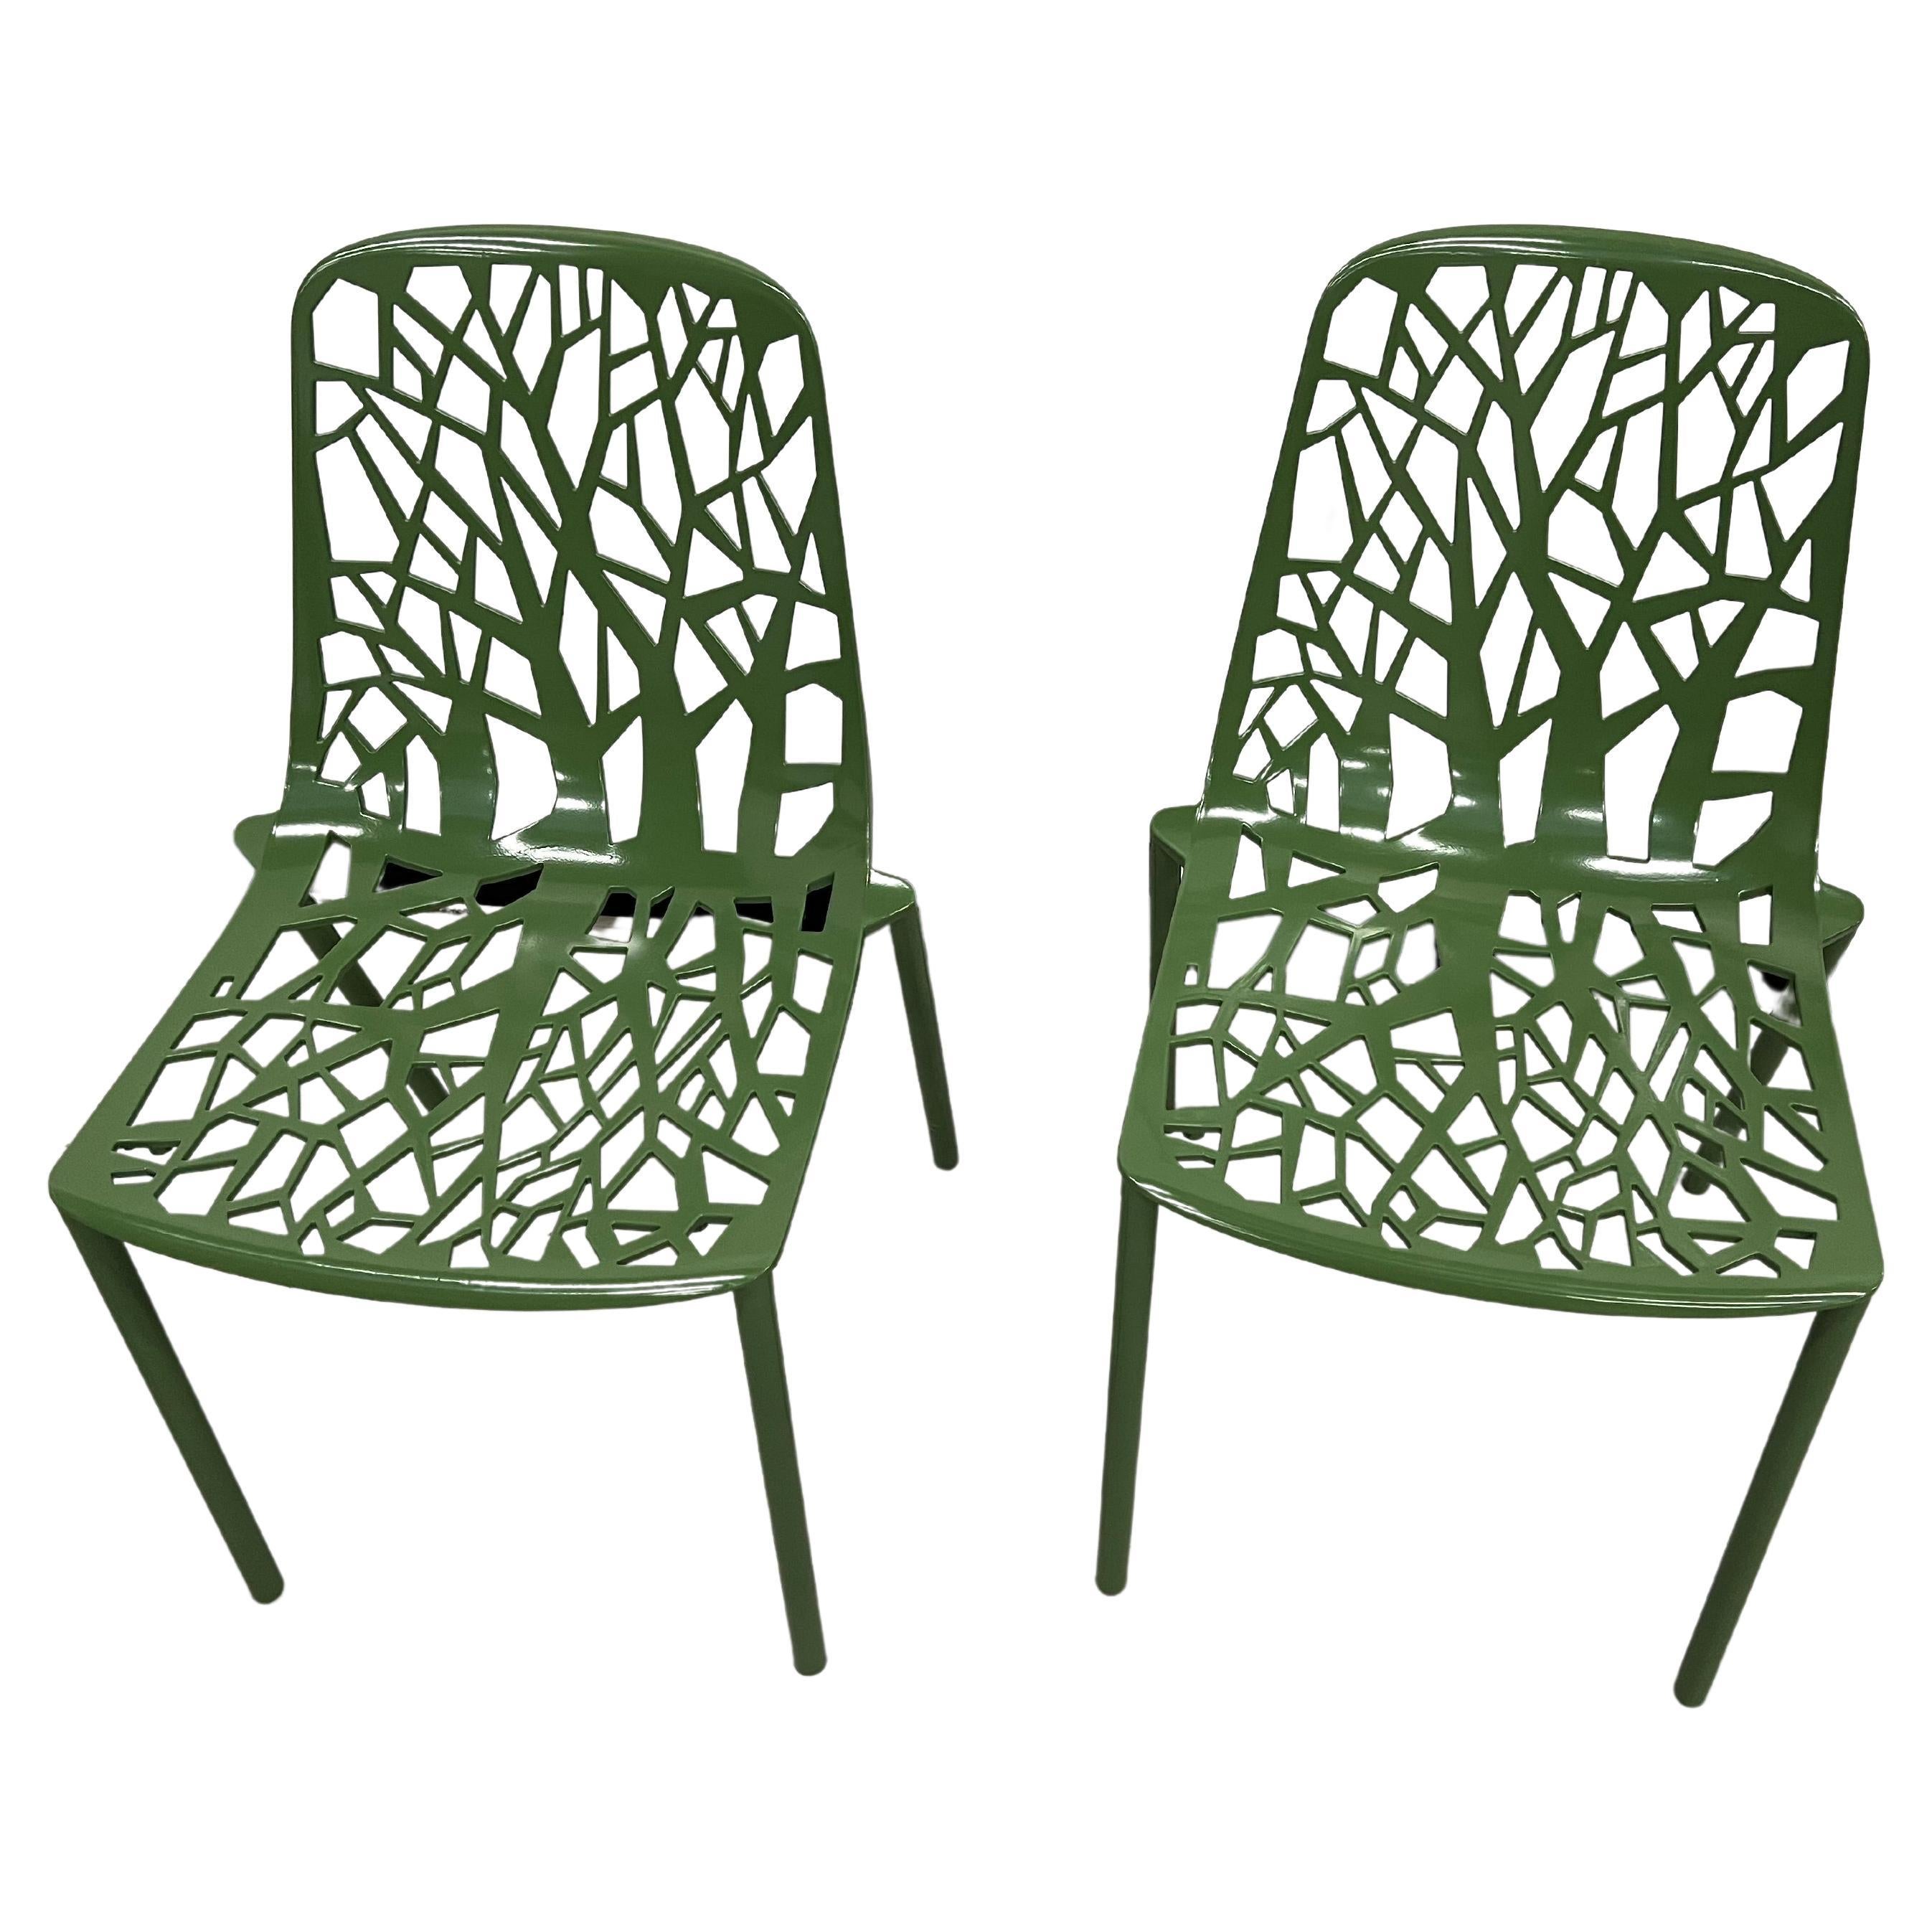 Duo of Fast Forest chairs